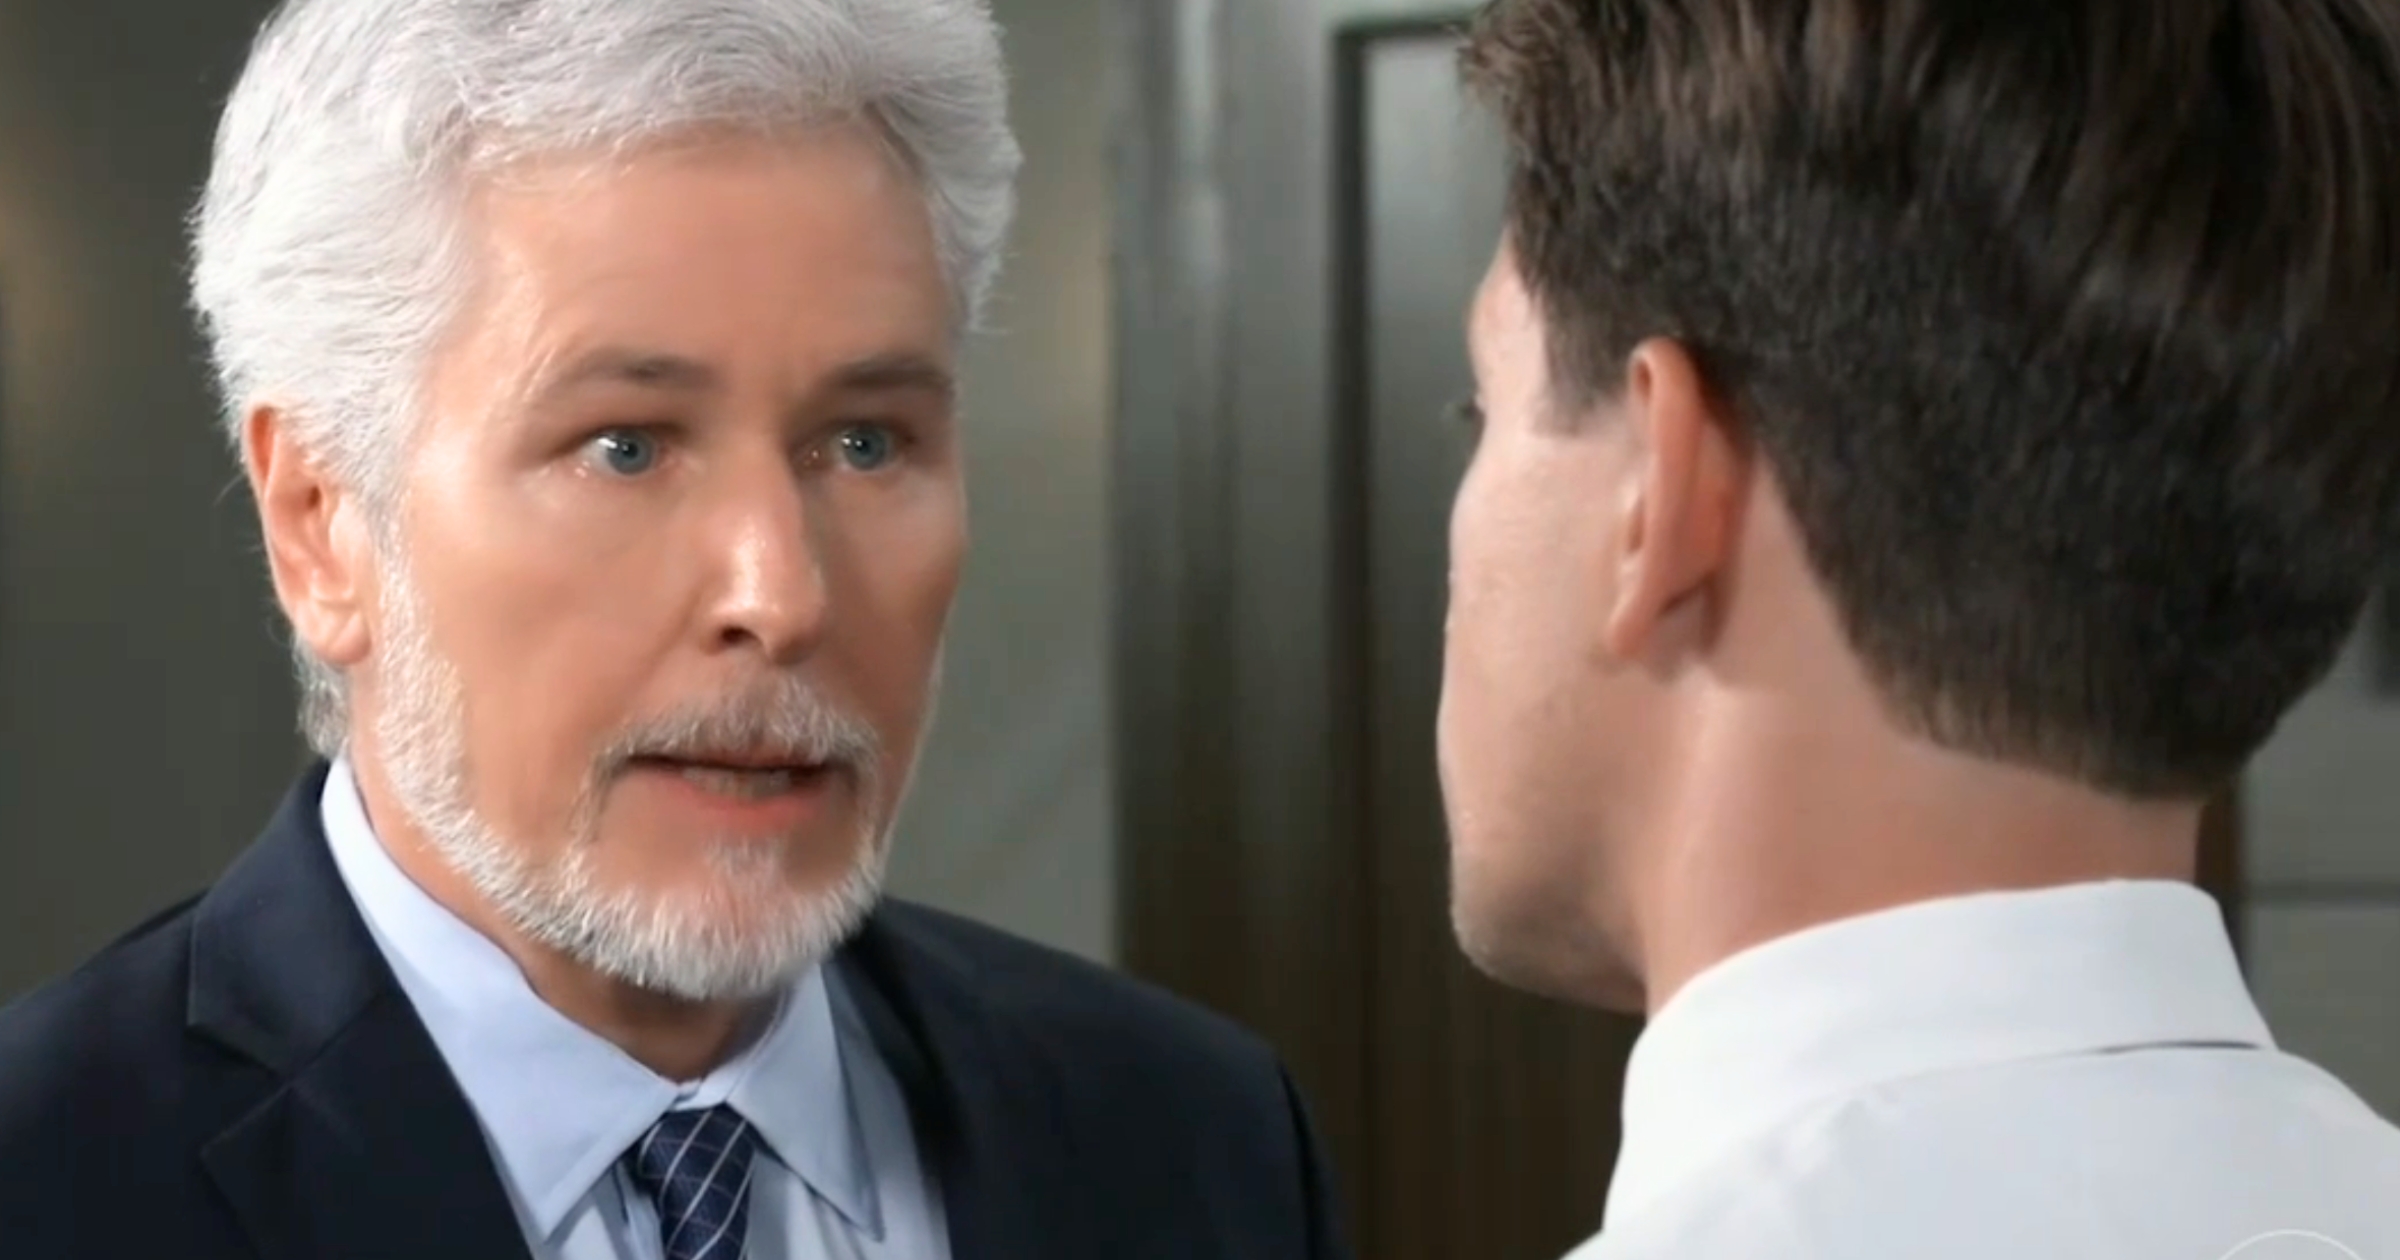 General Hospital - Oct 24 - Martin and Michael